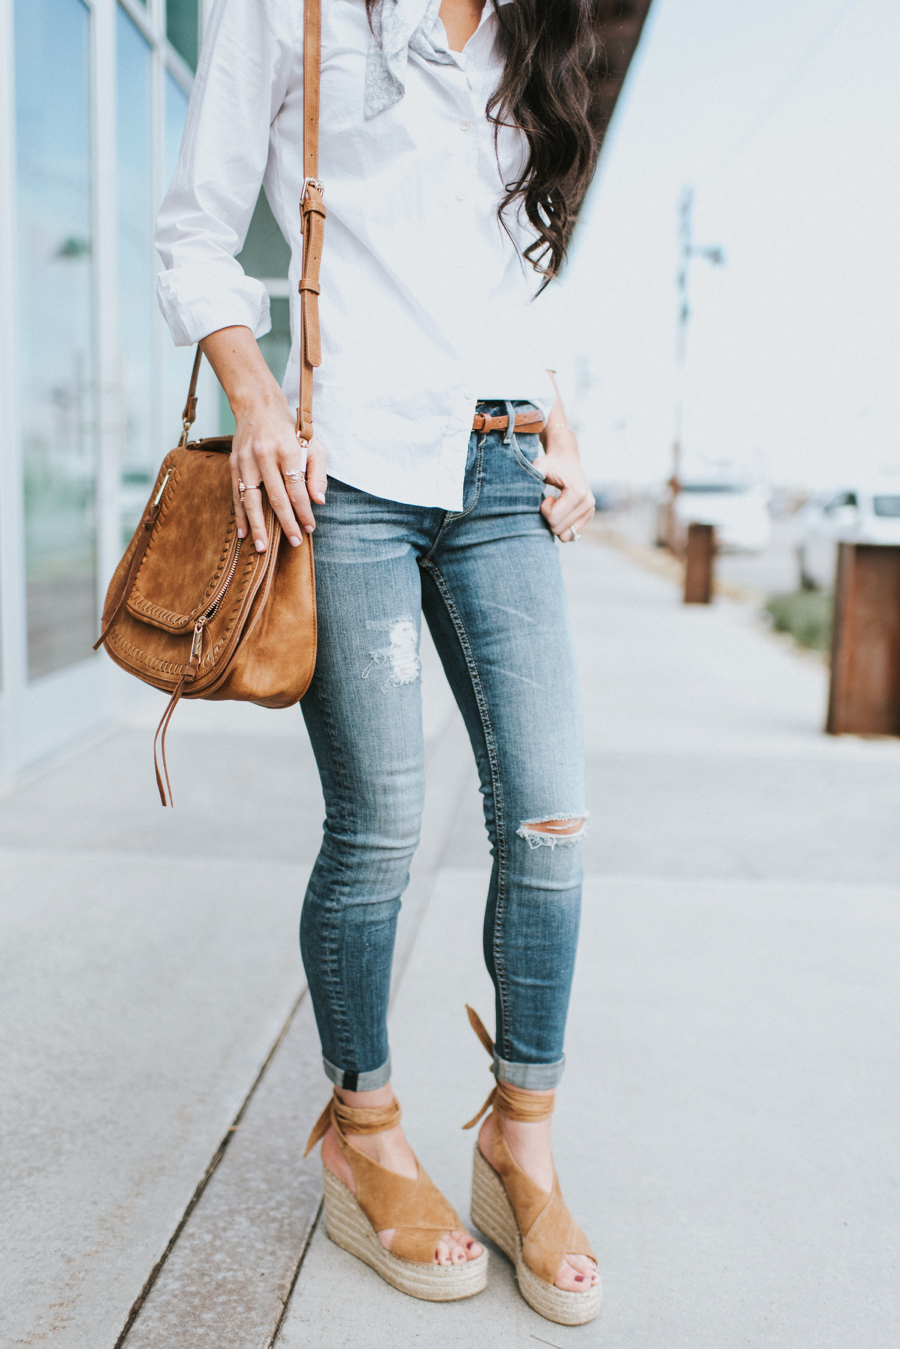 Neck Scarf and White Blouse – Brittany Maddux